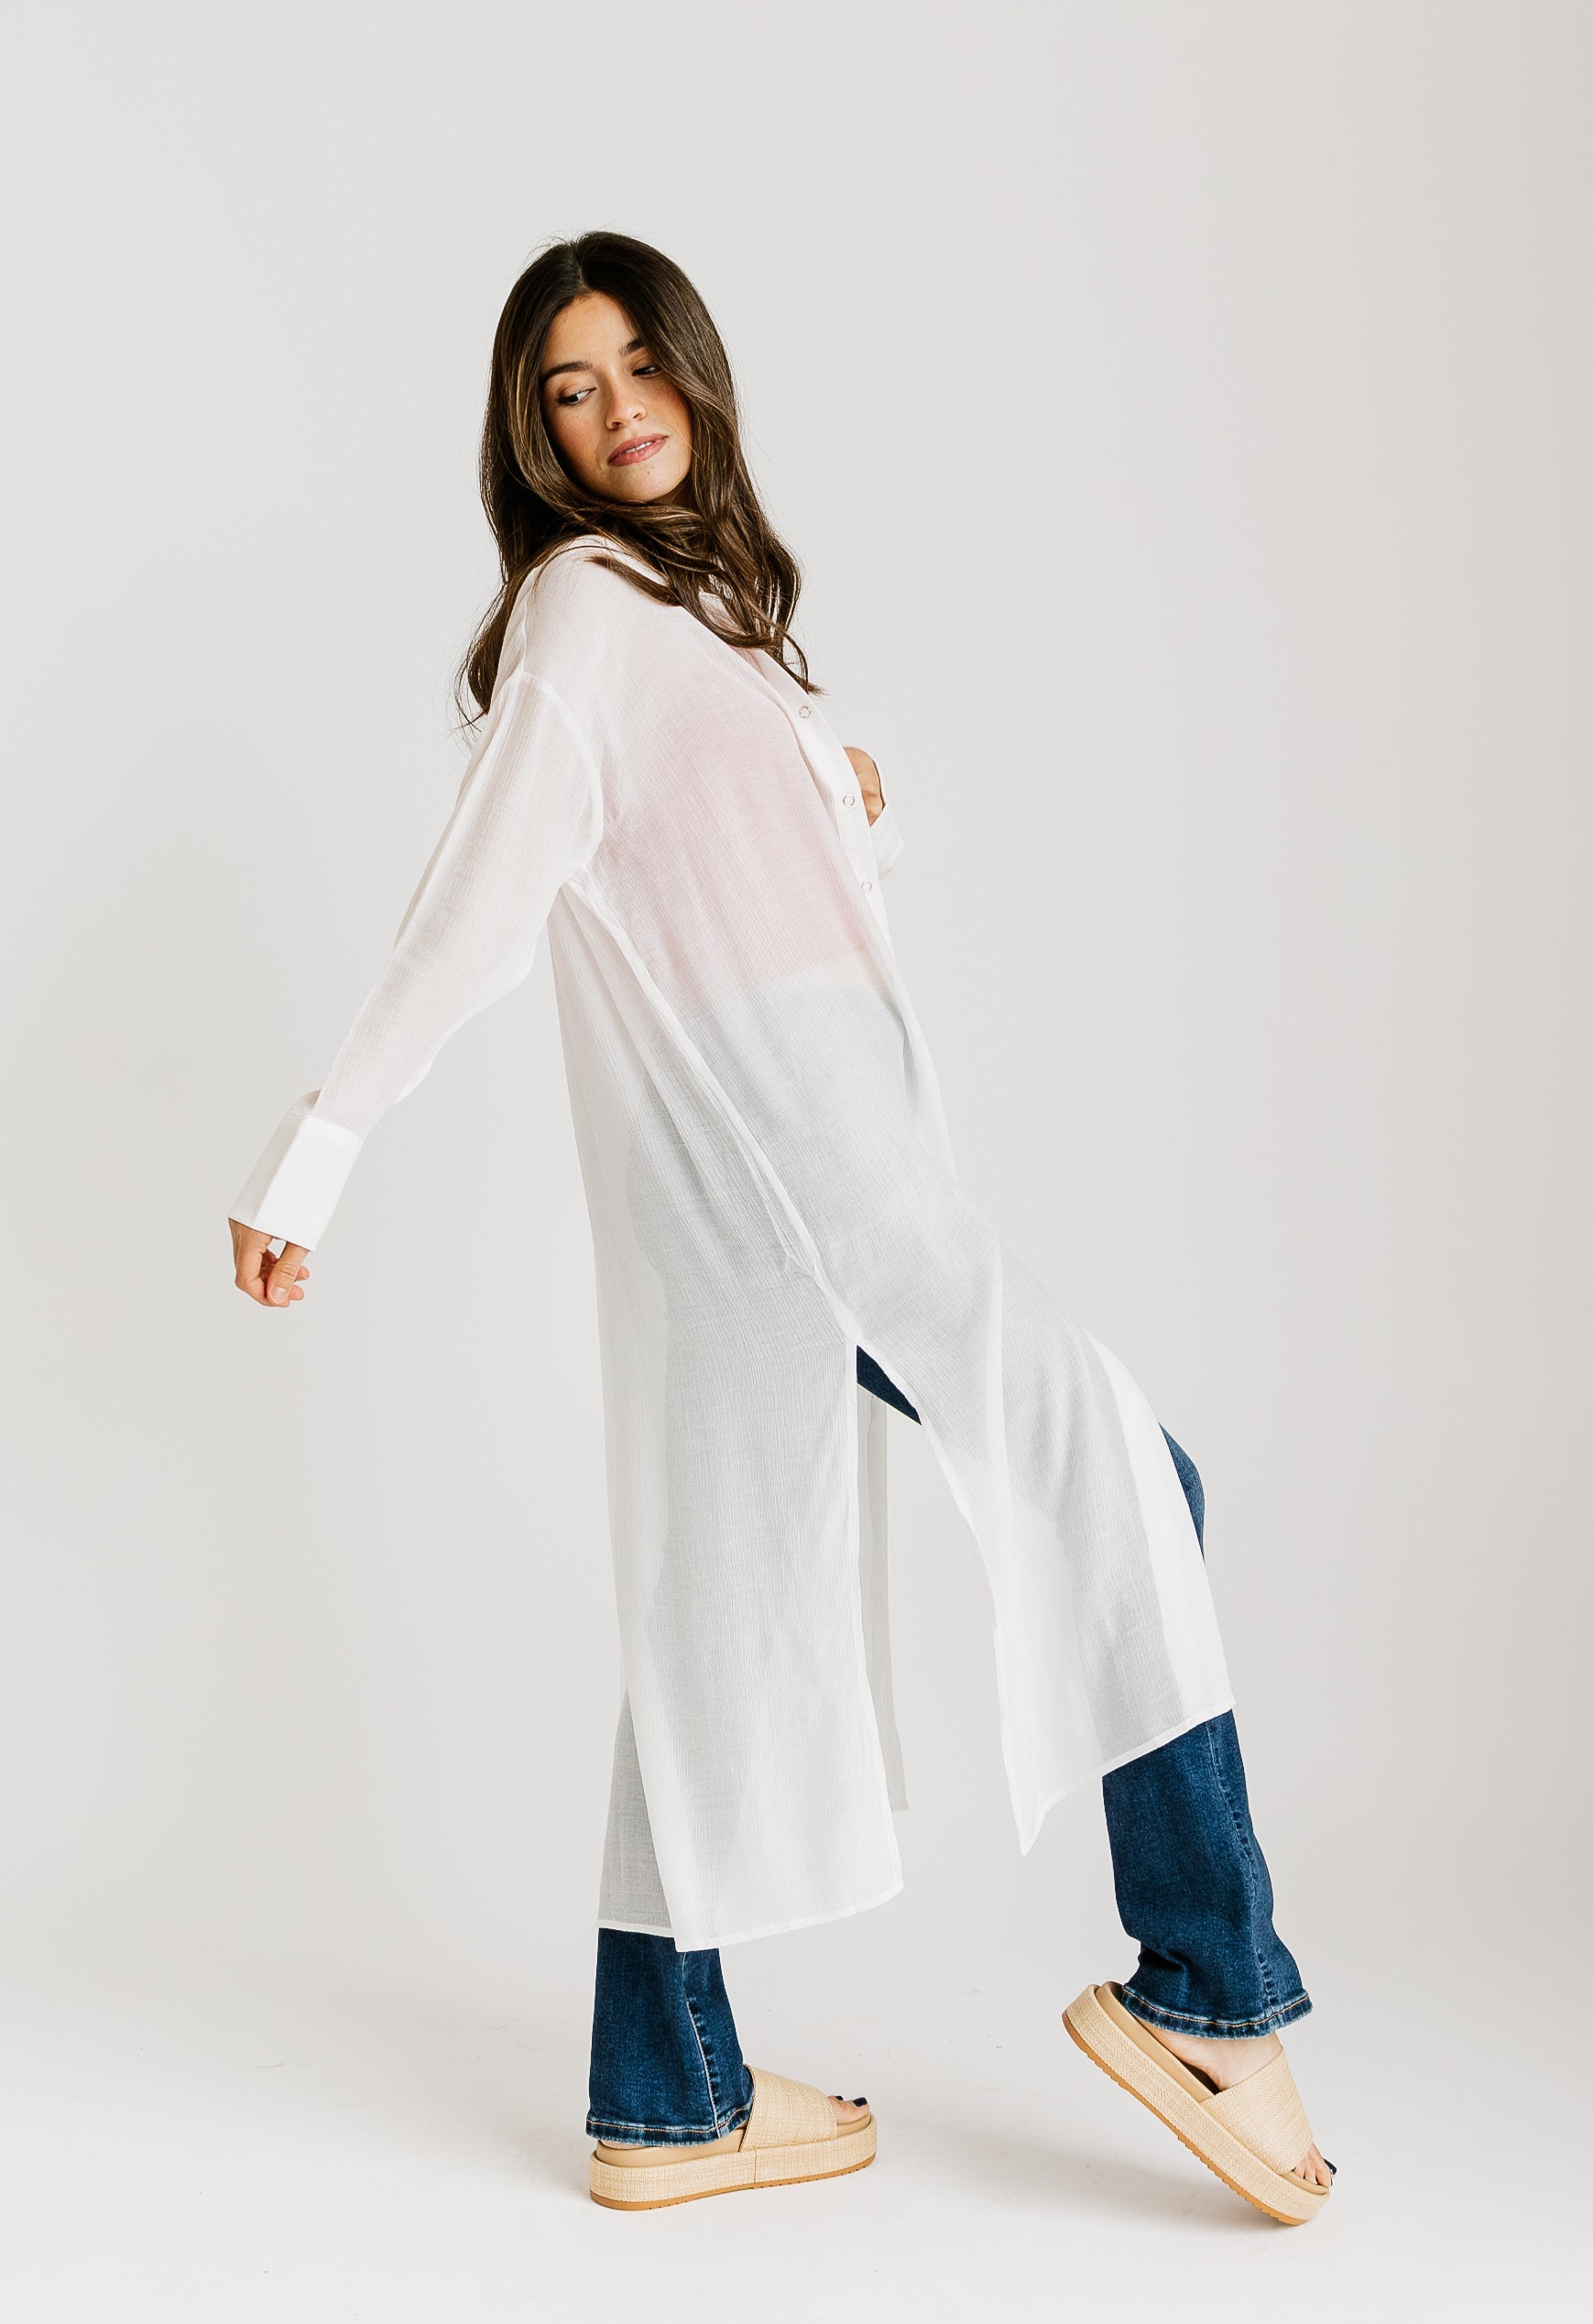 Paris Duster - OFF WHITE - willows clothing L/S Shirt